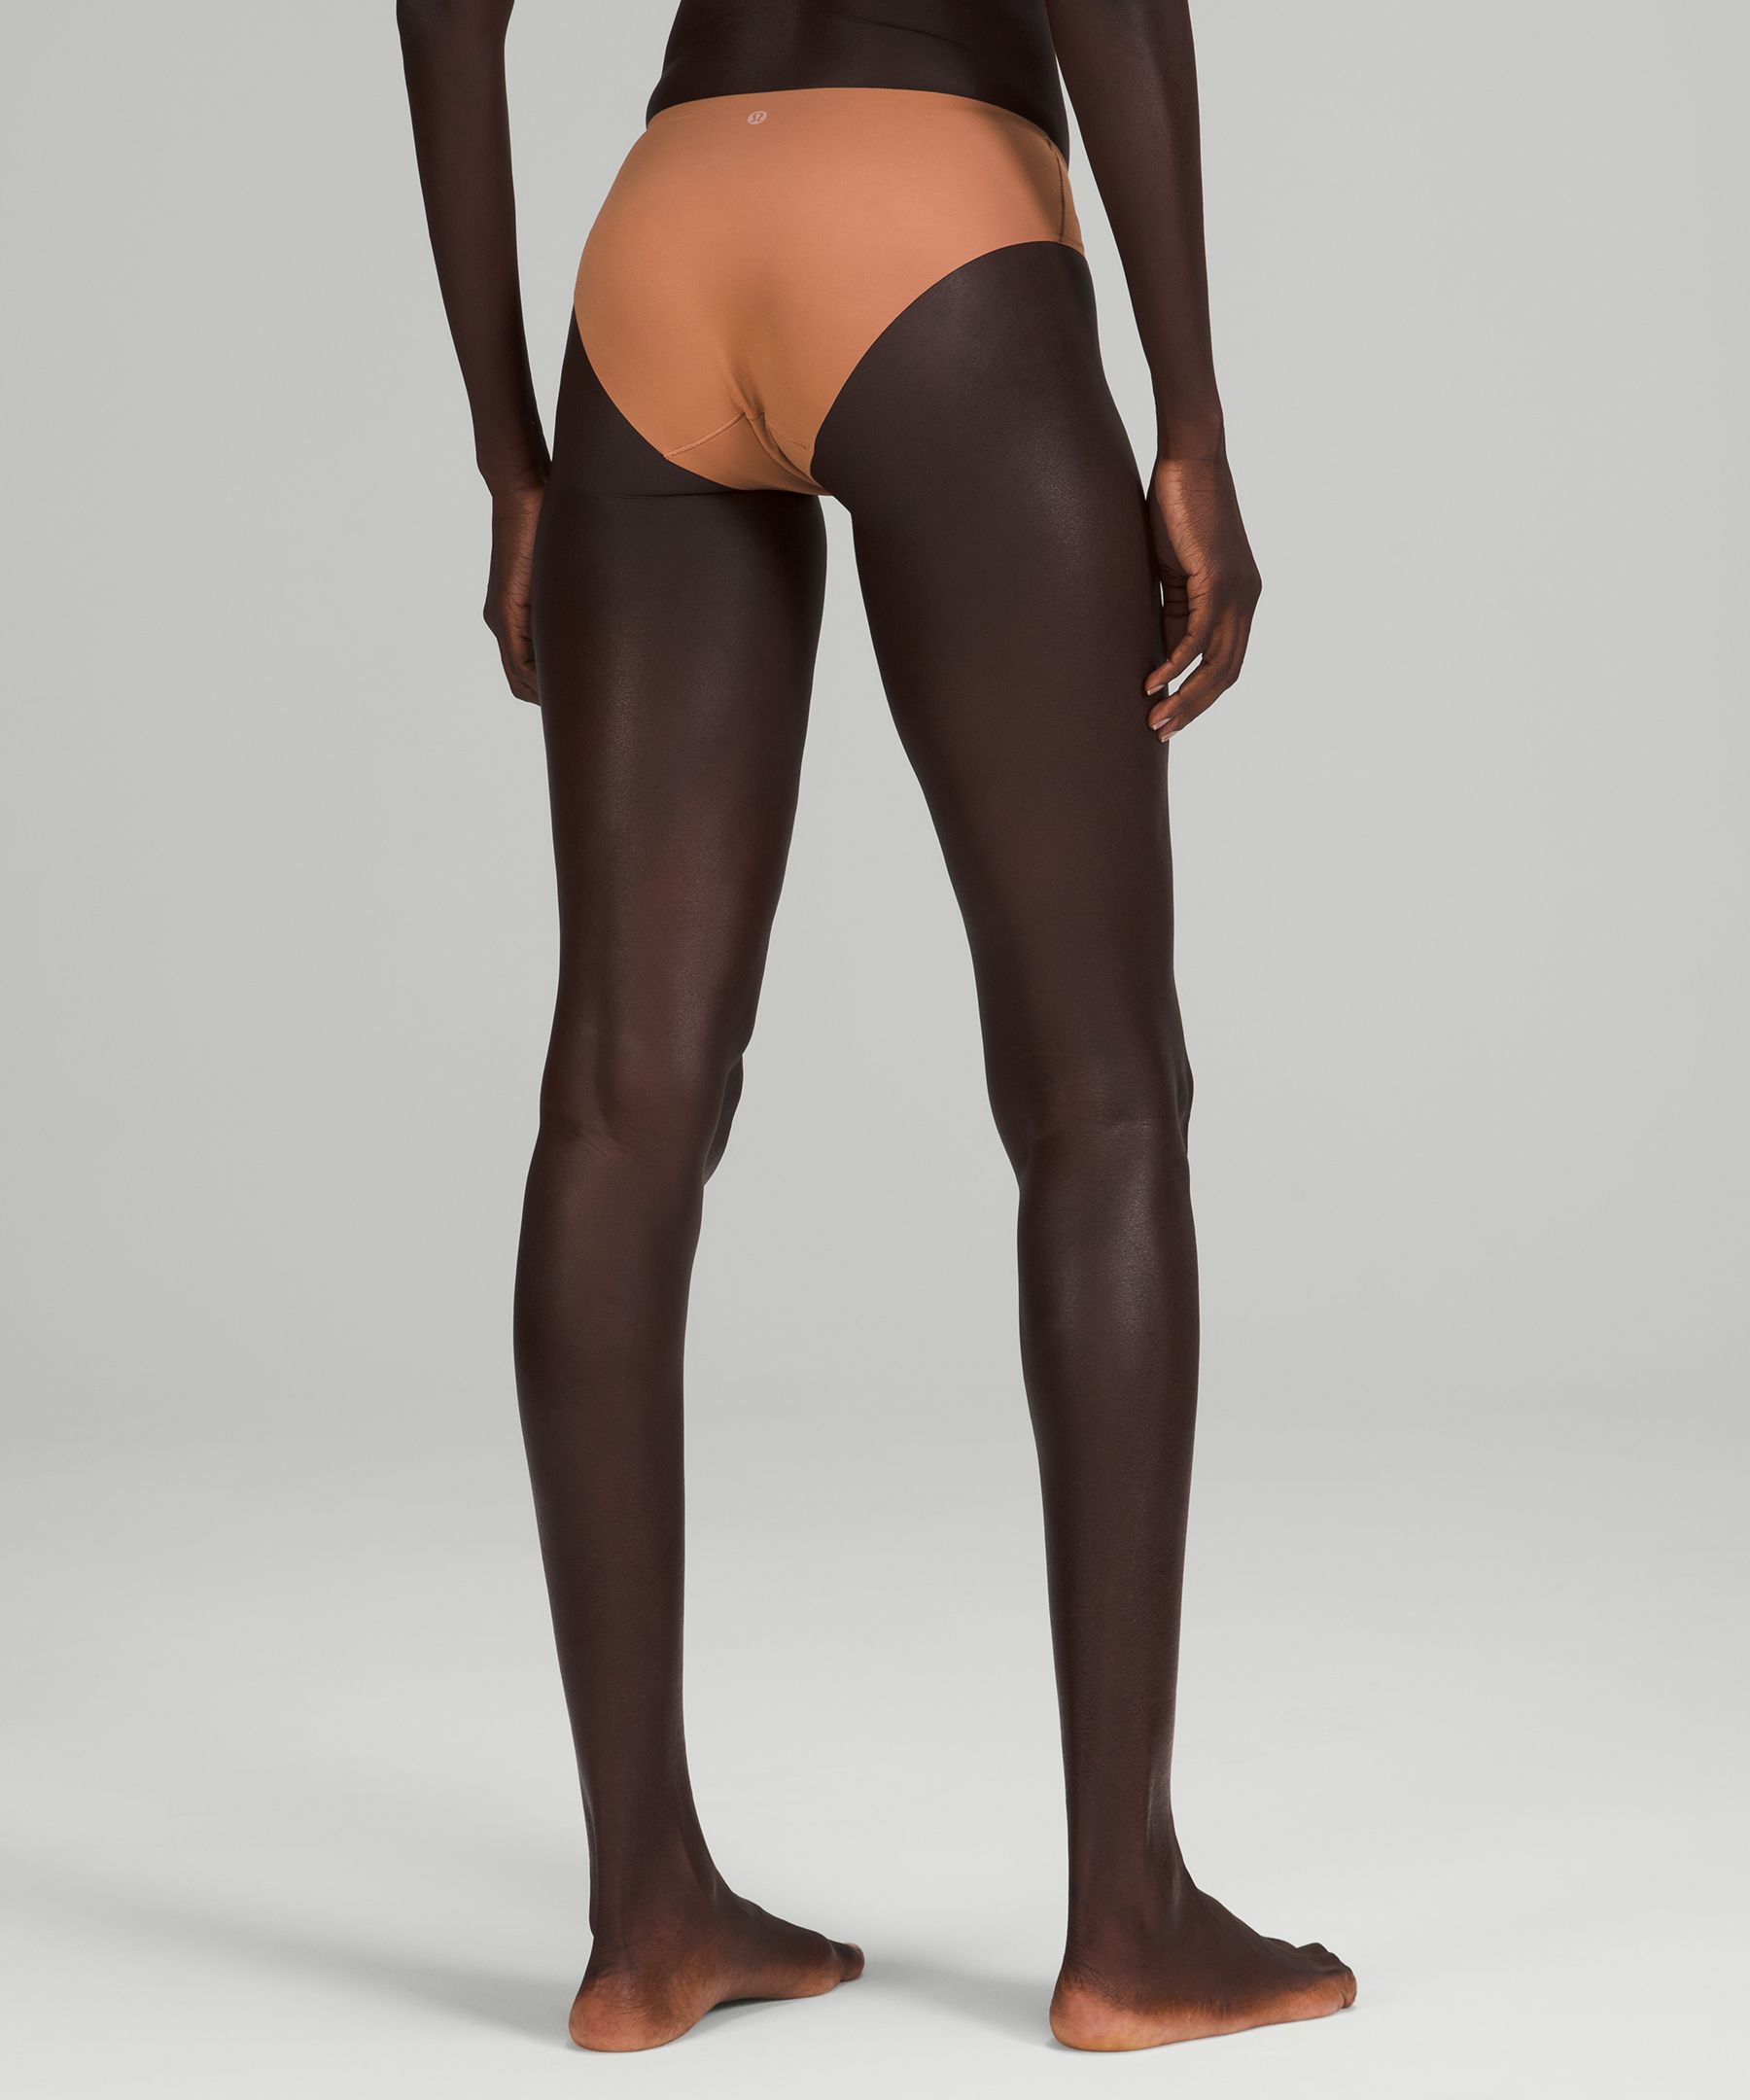 Lululemon UnderEase High-Rise Thong Underwear - French Press